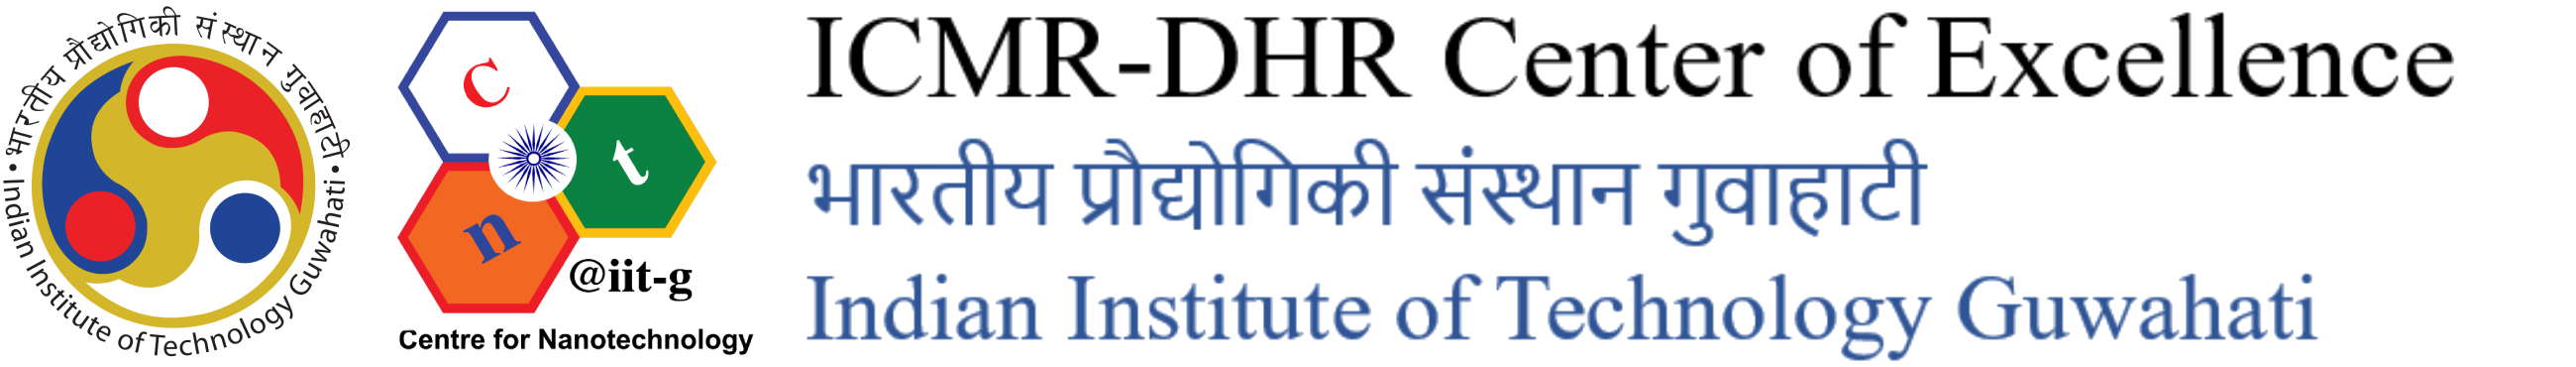 ICMR-DHR Center of Excellence